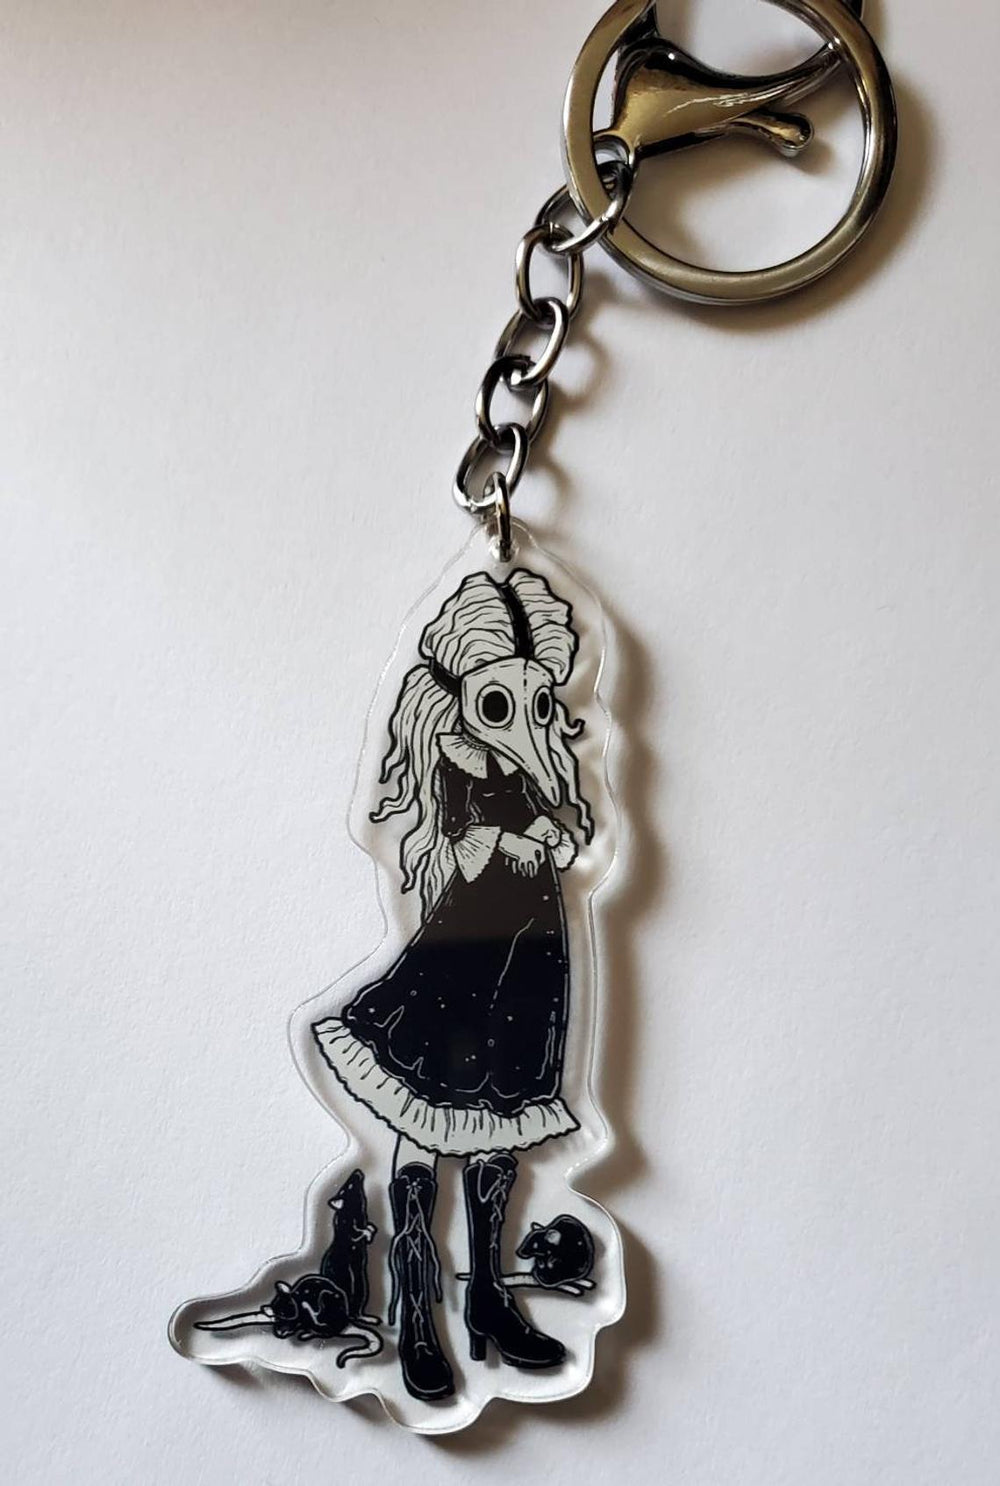 The Piper- Keychain